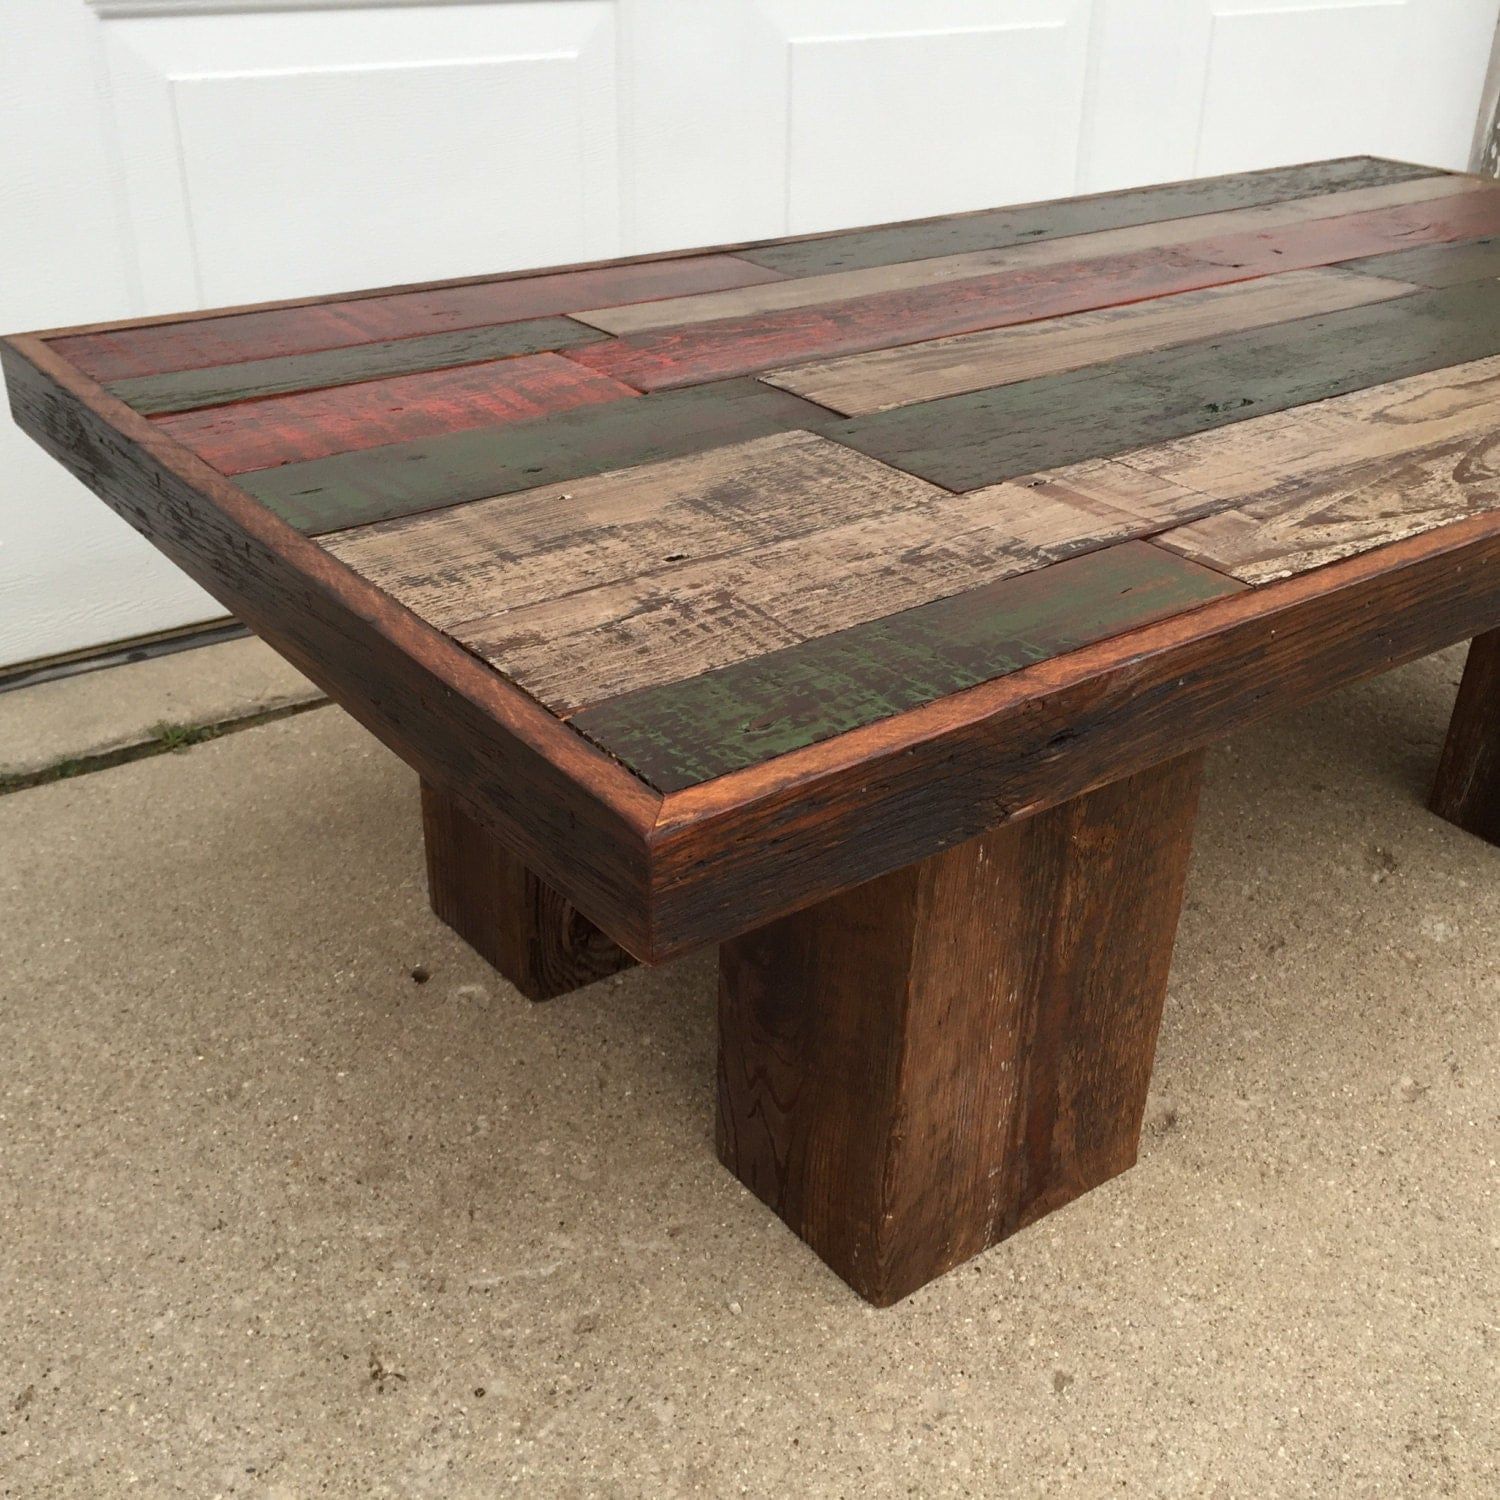 Reclaimed Barn Wood Coffee Table. This Is Beautiful Rustic Inside Rustic Wood Coffee Tables (Gallery 13 of 21)